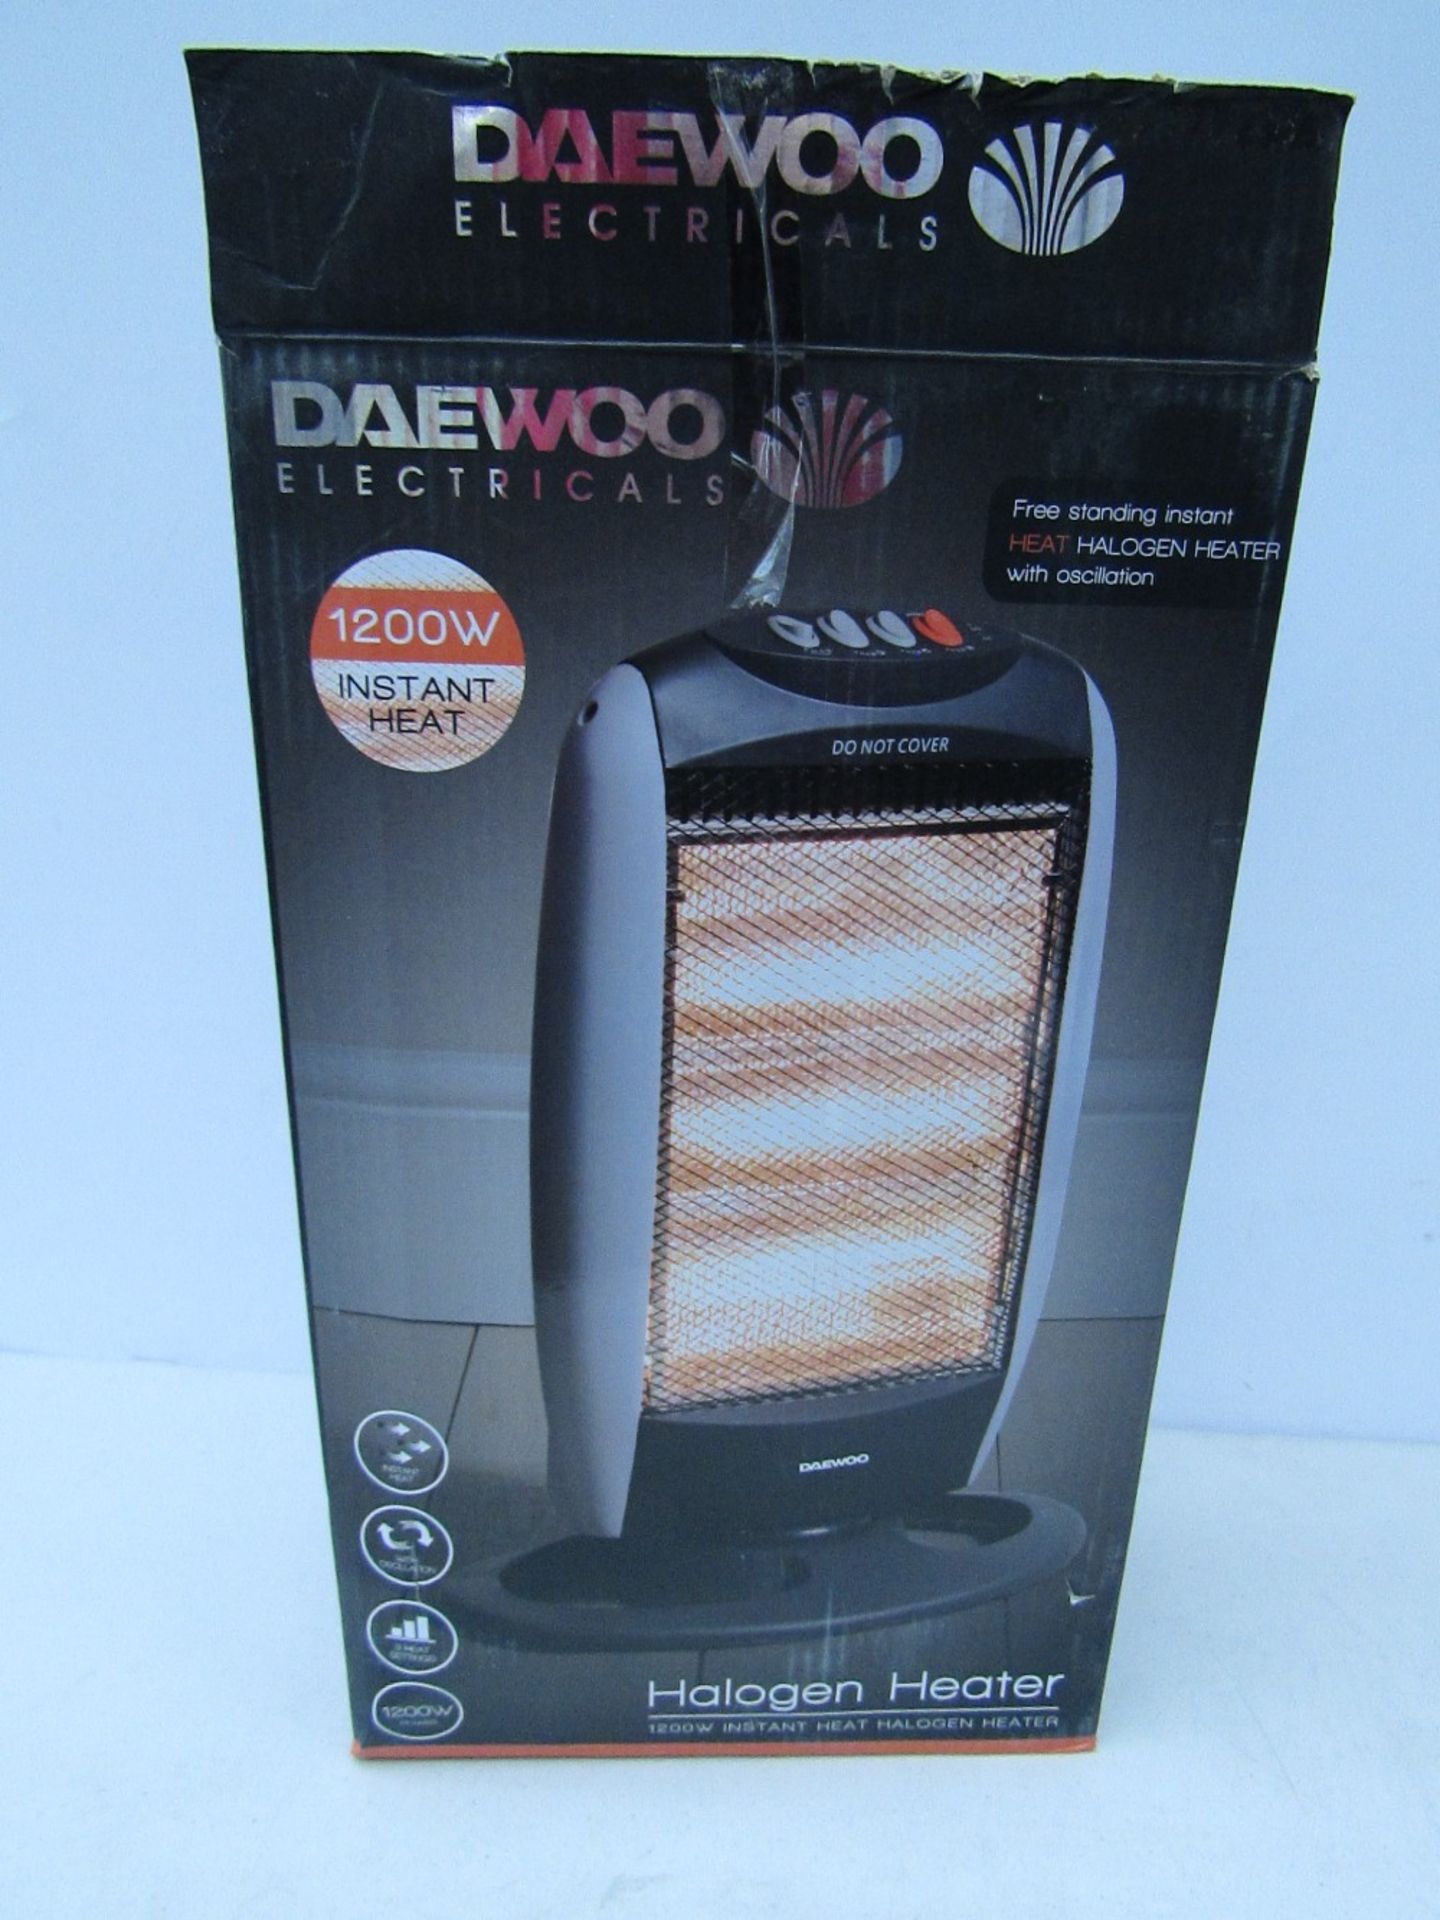 Daewoo Electricals 1200w instant heat halogen heater. Tested working & boxed.